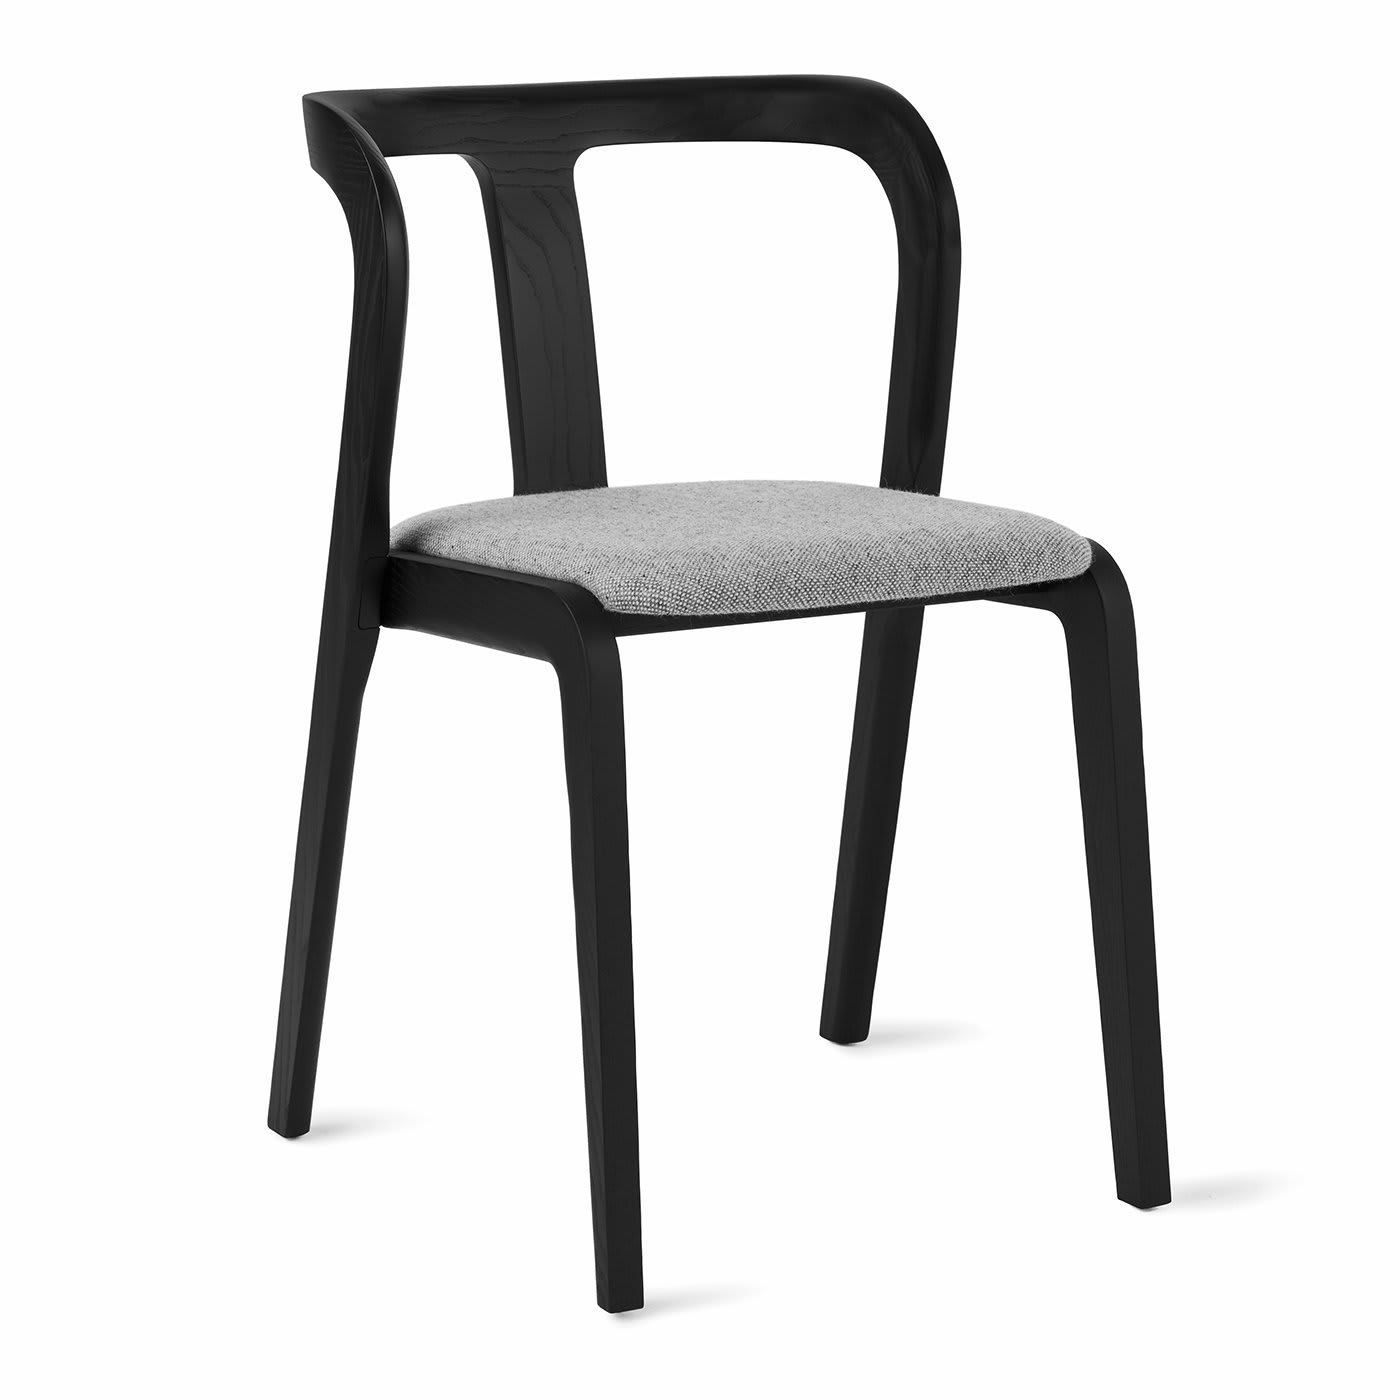 Genea Black Ash Chair with Gray Upholstered Seat - Passoni Design